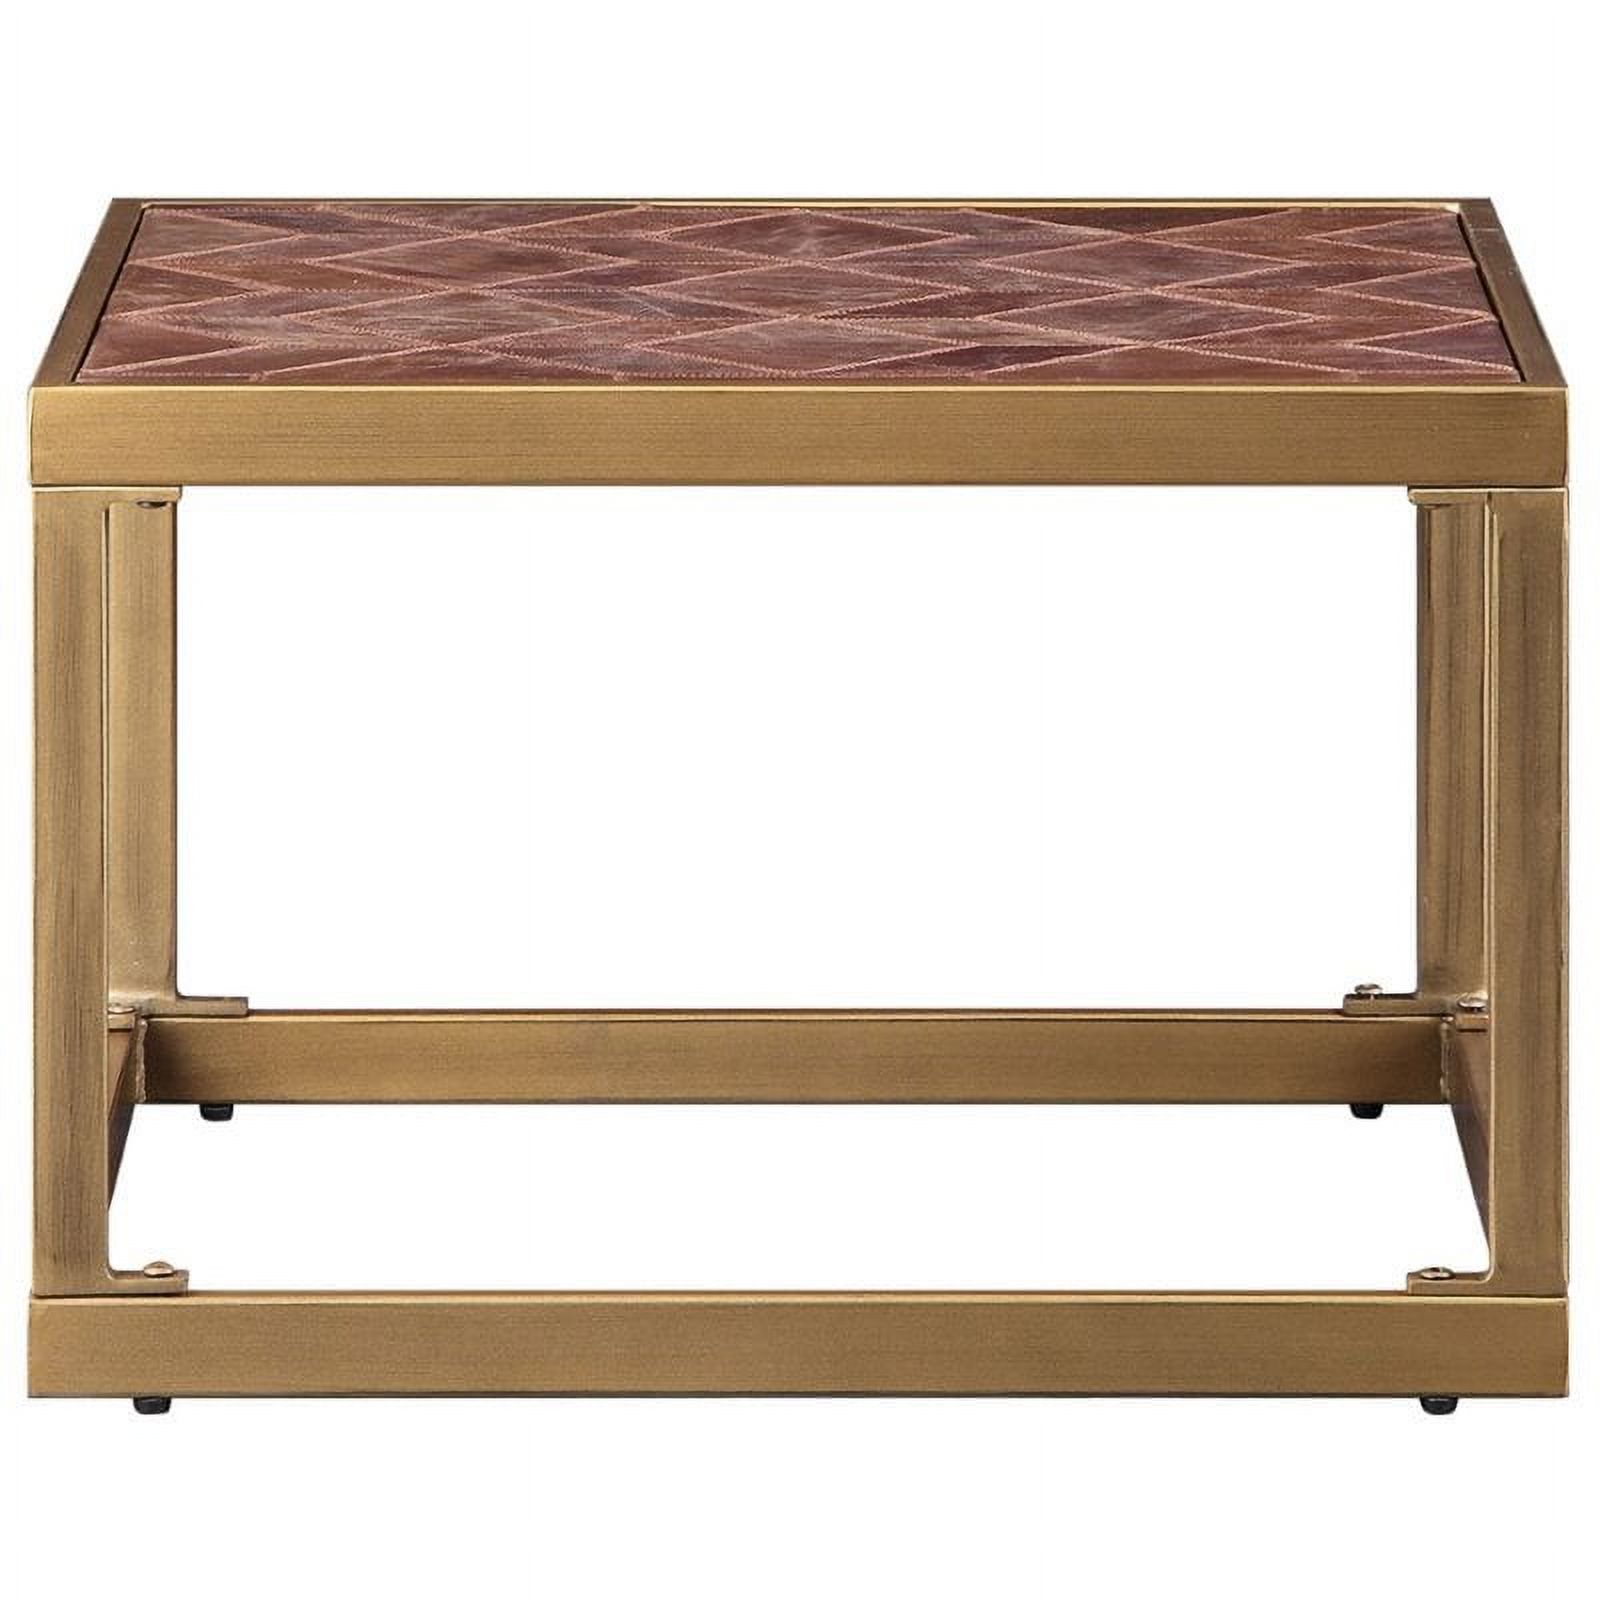 ACME Genevieve Rectangular Metal Frame End Table in Retro Brown and Brass - image 3 of 5